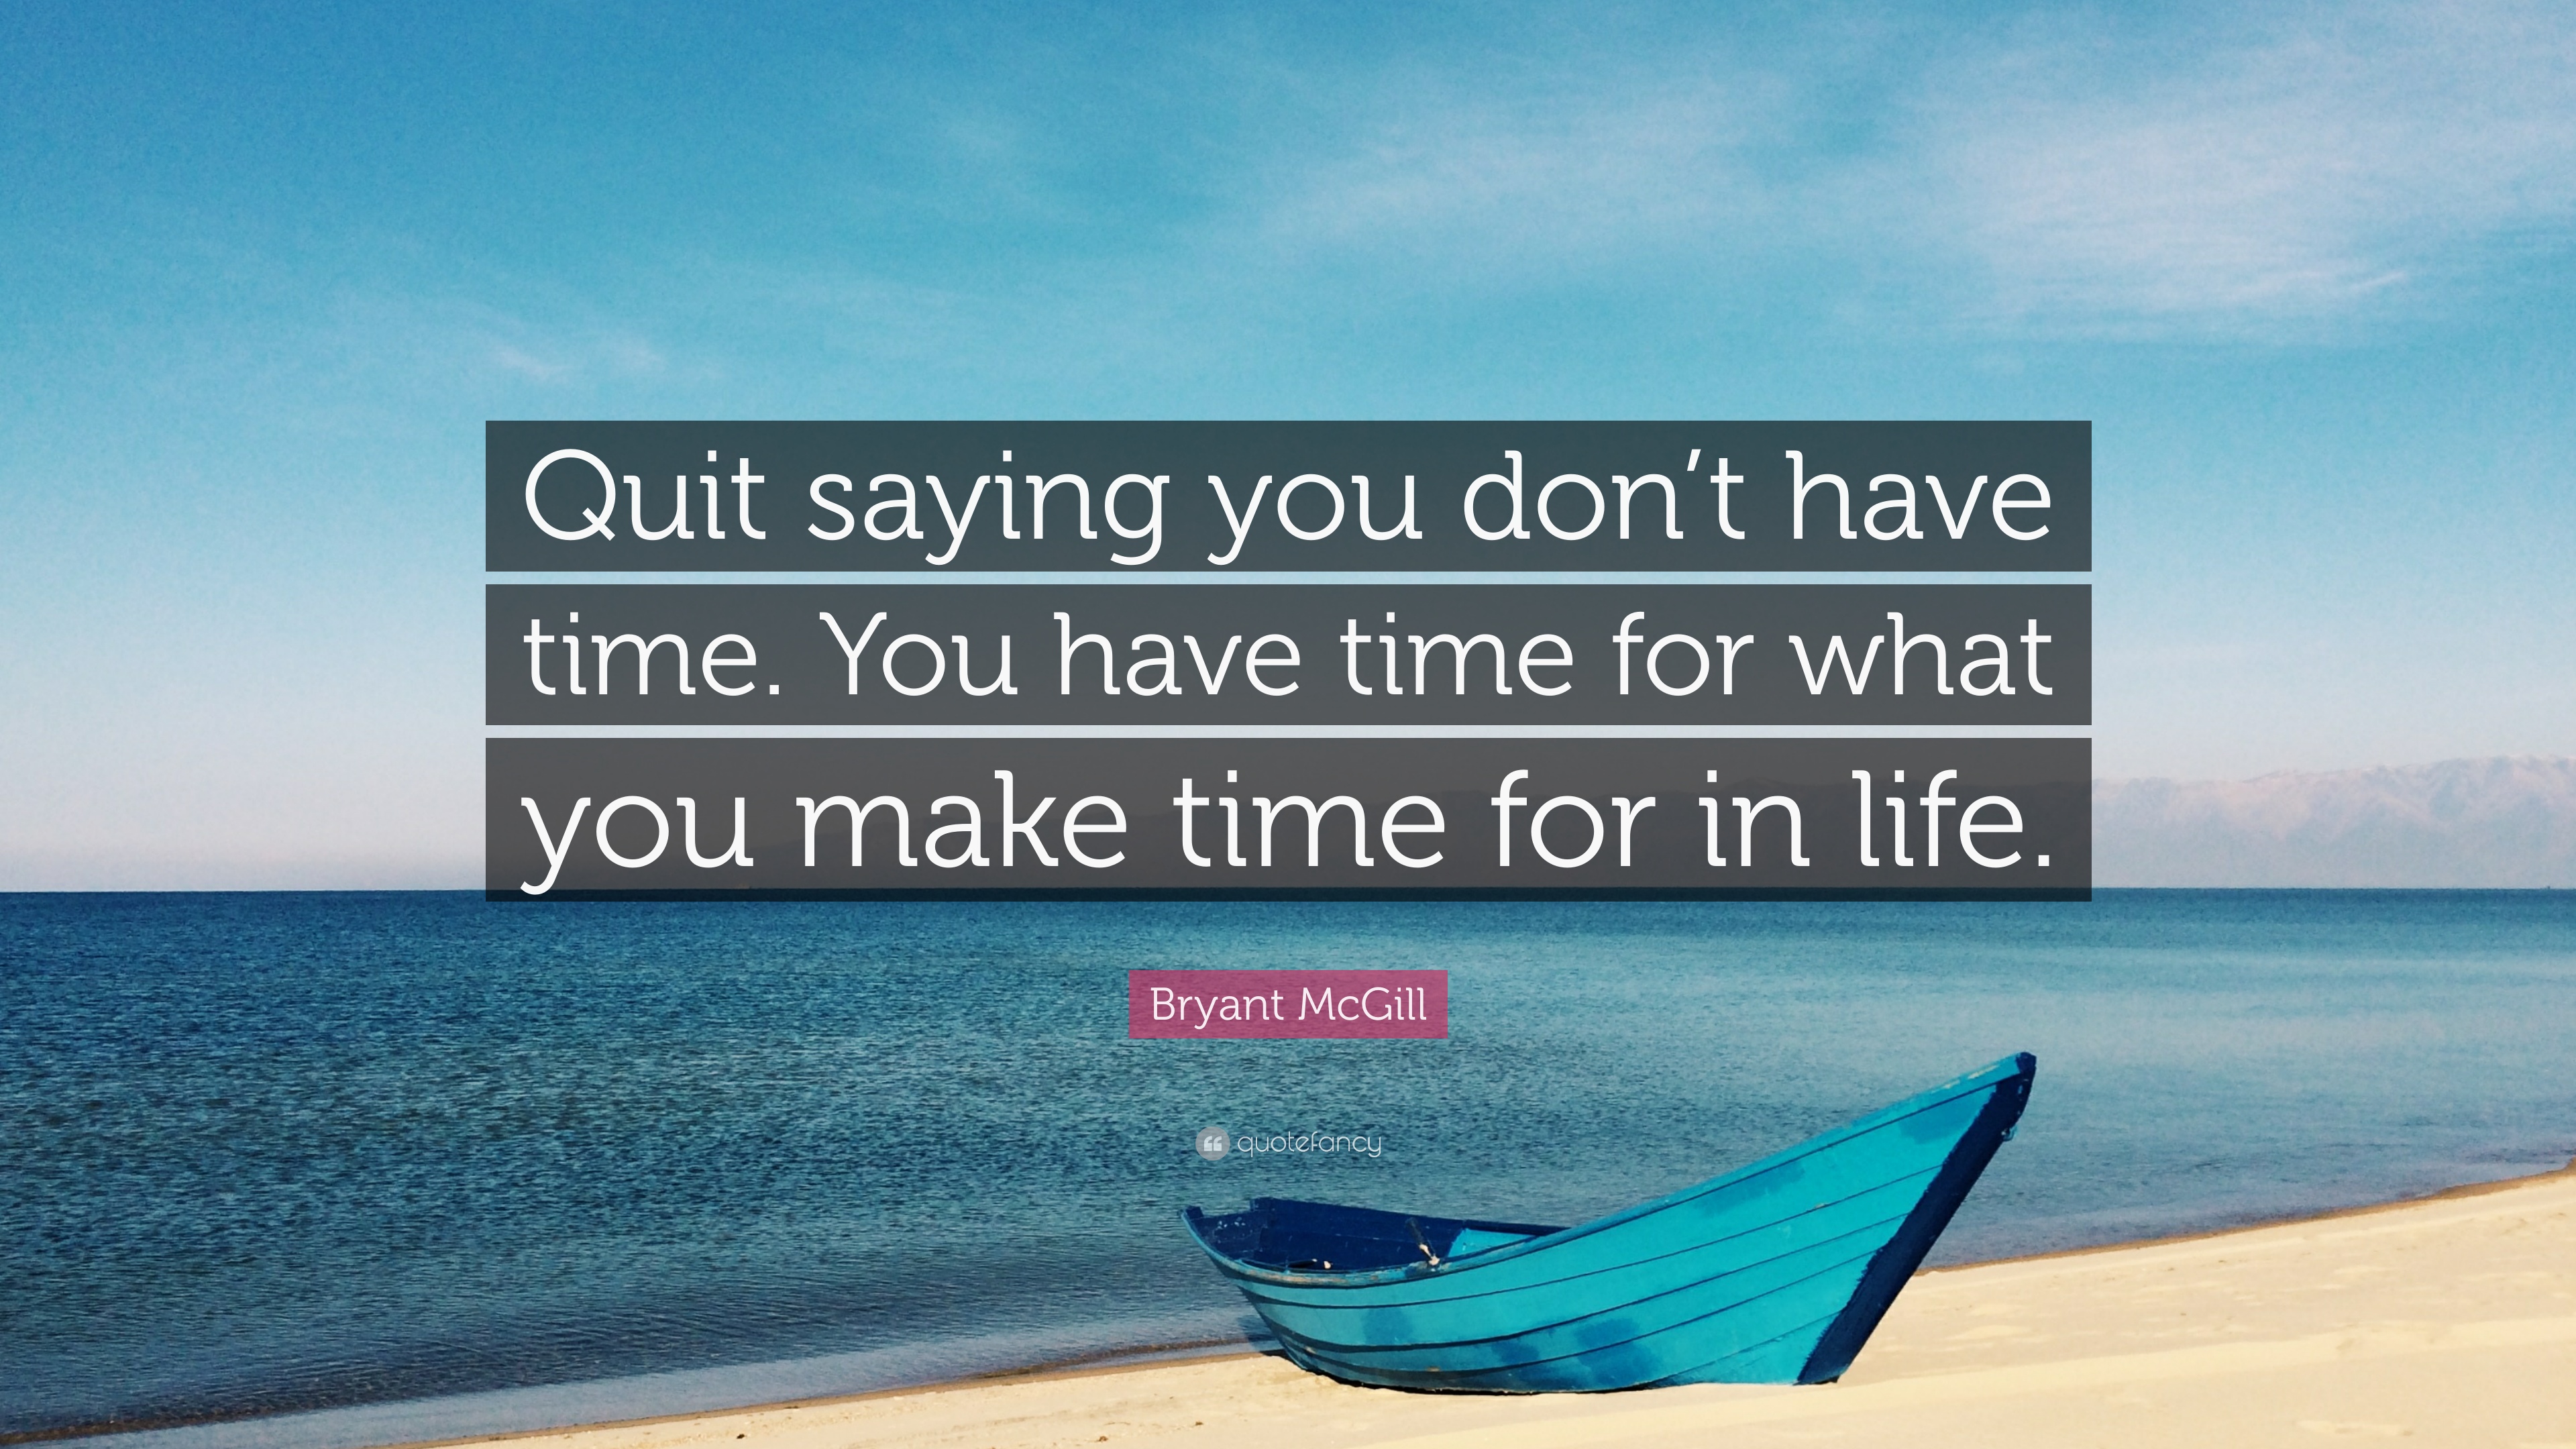 Bryant McGill Quote: “Quit saying you don't have time. You